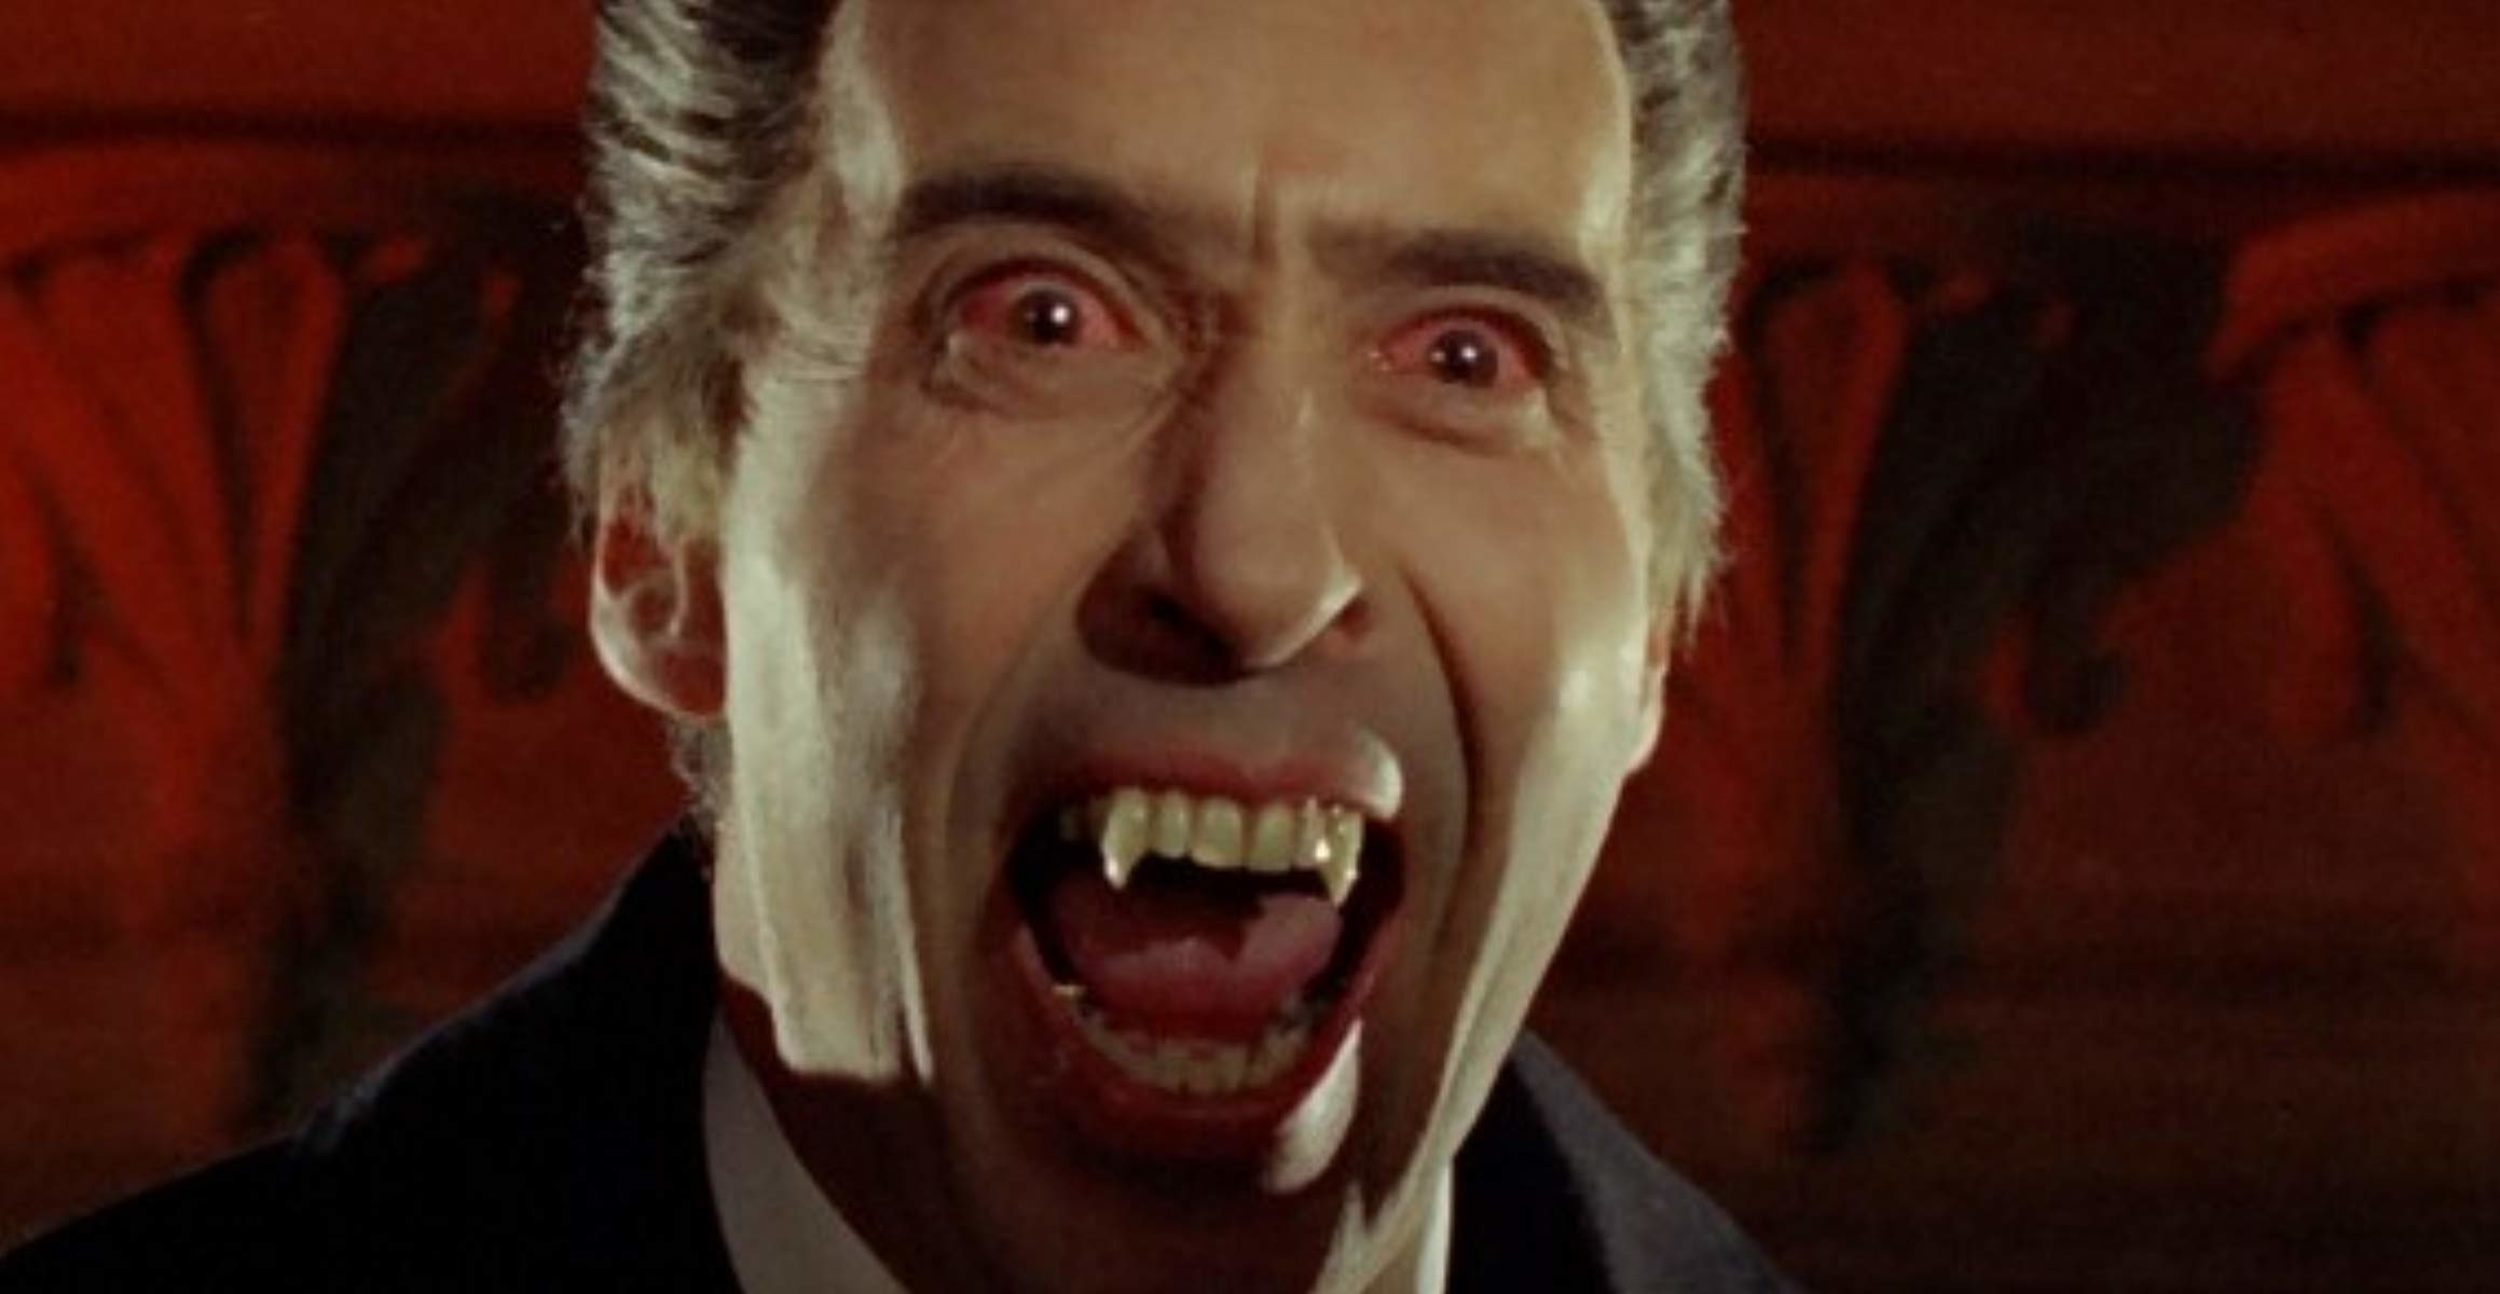 <p>Ask most people to name the most iconic Dracula of the 20th century, and they’ll likely fire back with Bela Lugosi. But those with a taste for the bloody stuff might very well go with Christopher Lee, who feasted on many a neck as the Count over six movies. His arch-nemesis was Peter Cushing’s Van Helsing, who appeared in two of the best entries (“House of Dracula” and “Dracula A.D. 1972”) while also turning up in the uninspired “The Satanic Rites of Dracula." The most underrated of the bunch: Freddie Francis’ “Dracula Has Risen from the Grave."</p>